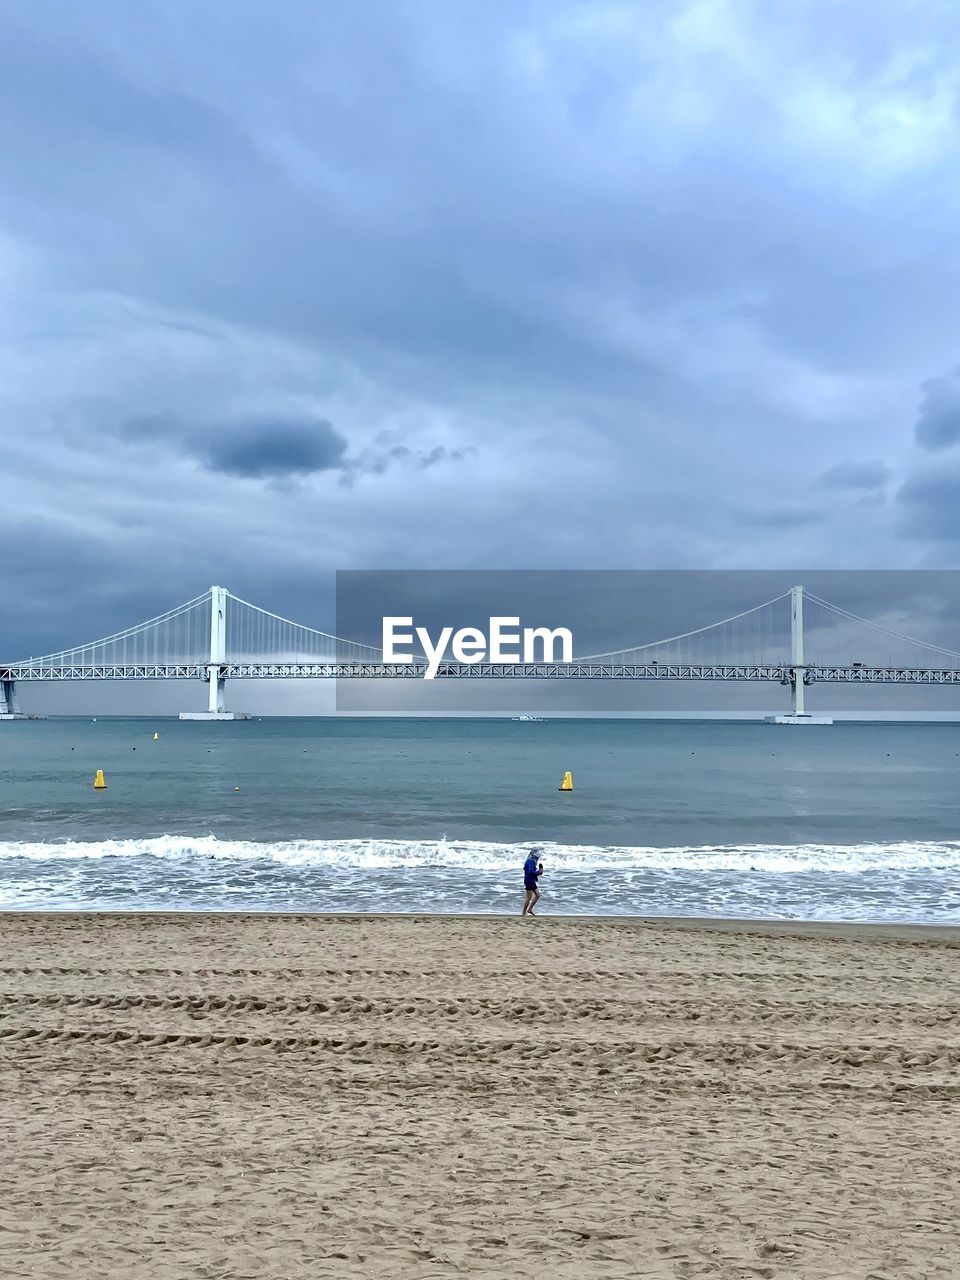 water, sea, bridge, sky, beach, built structure, architecture, suspension bridge, land, travel destinations, cloud, nature, tourism, travel, transportation, engineering, shore, horizon, sand, holiday, ocean, coast, beauty in nature, wave, scenics - nature, trip, vacation, body of water, city, pier, outdoors, day, motion, building exterior, overcast, copy space, environment, water's edge, tranquil scene, tranquility, surfing, horizon over water, bay of water, coastline, man made structure, bay, dramatic sky, landscape, sports, distant, tide